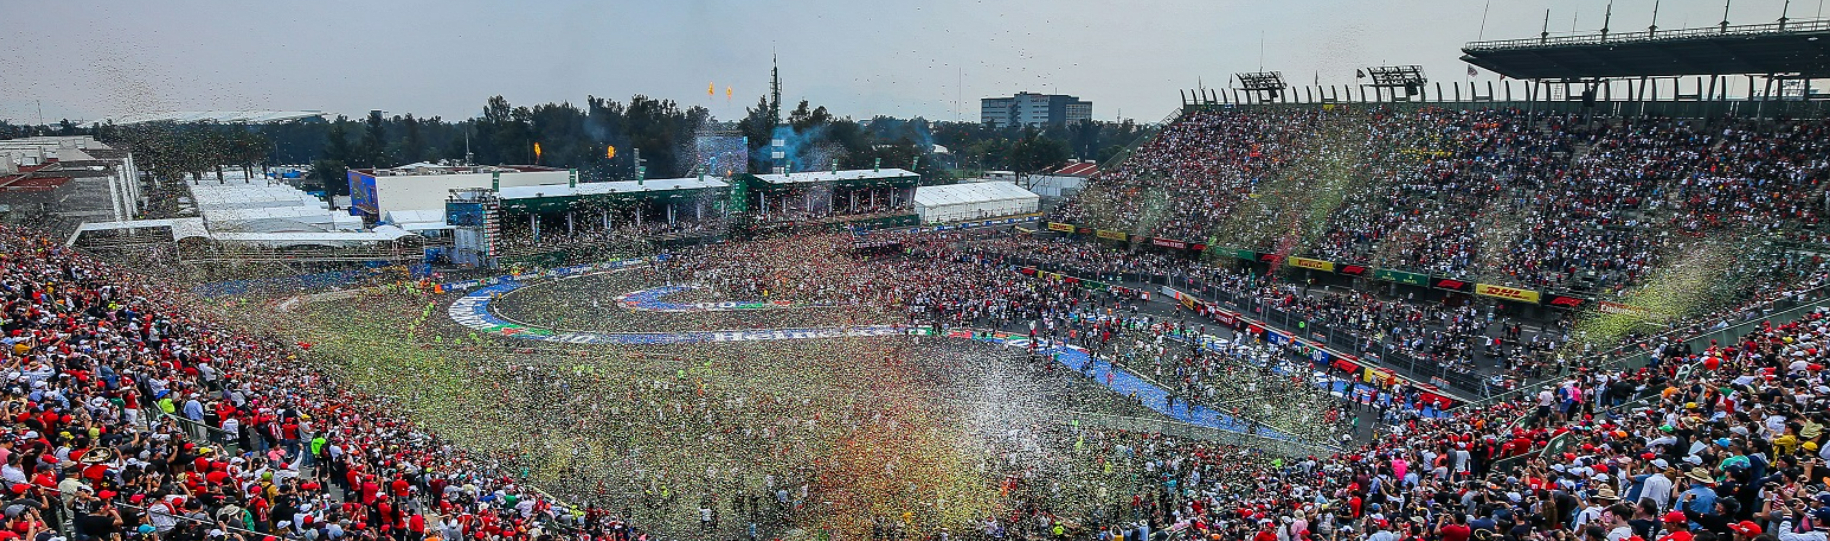 The Foro Sol stadium section at the end of a race with fans celebrating.